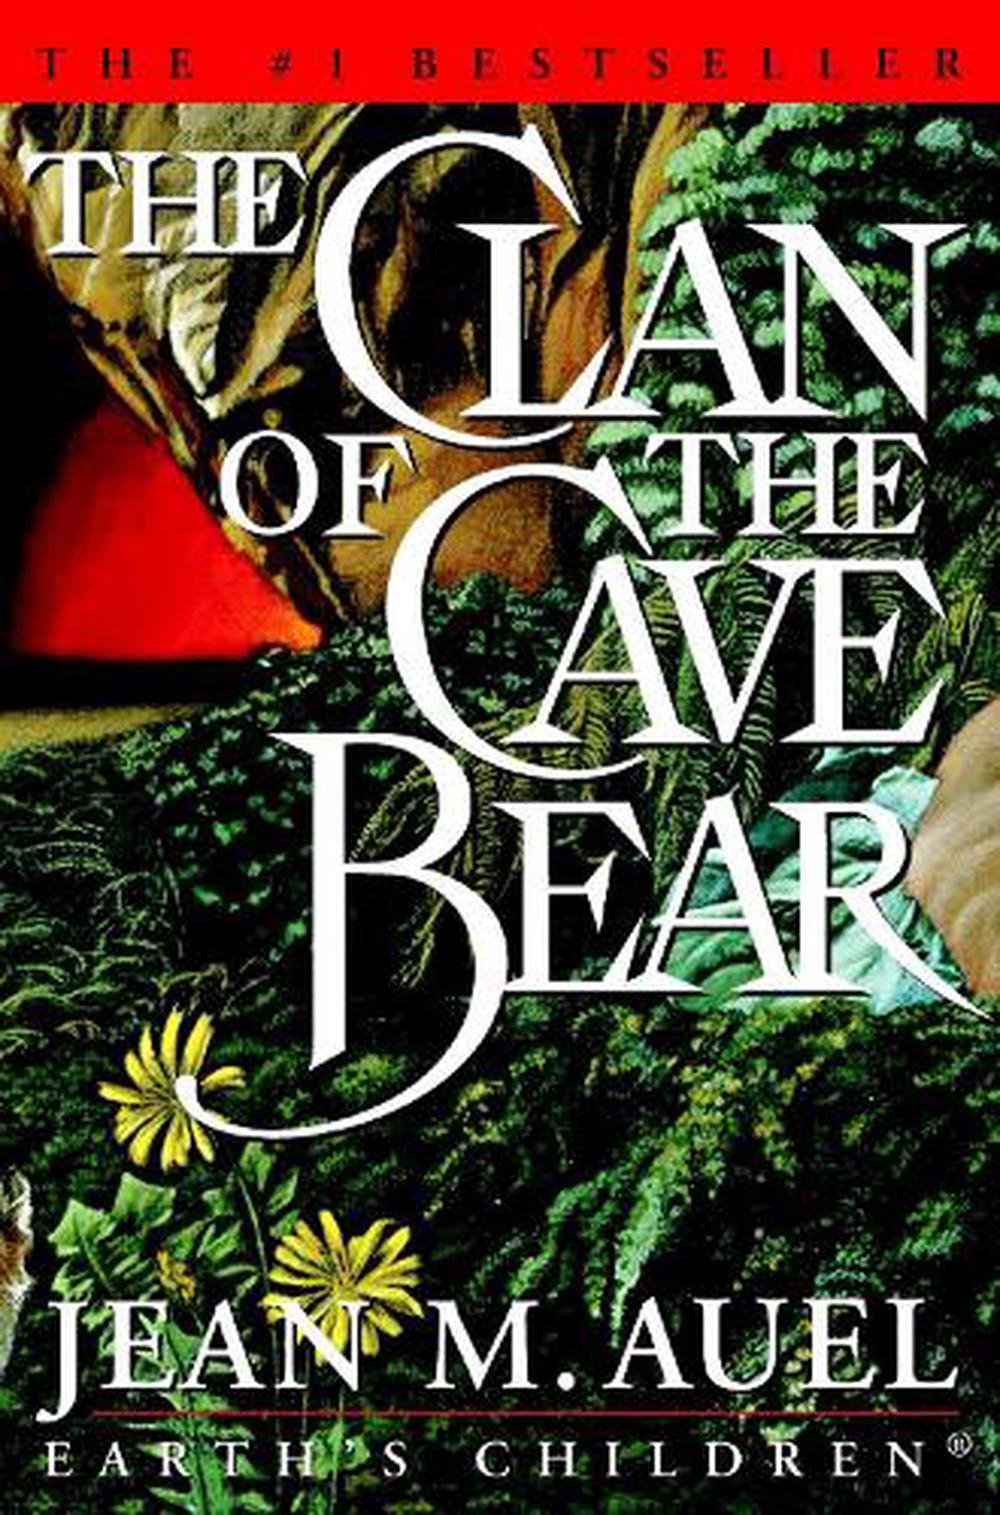 auel clan of the cave bear